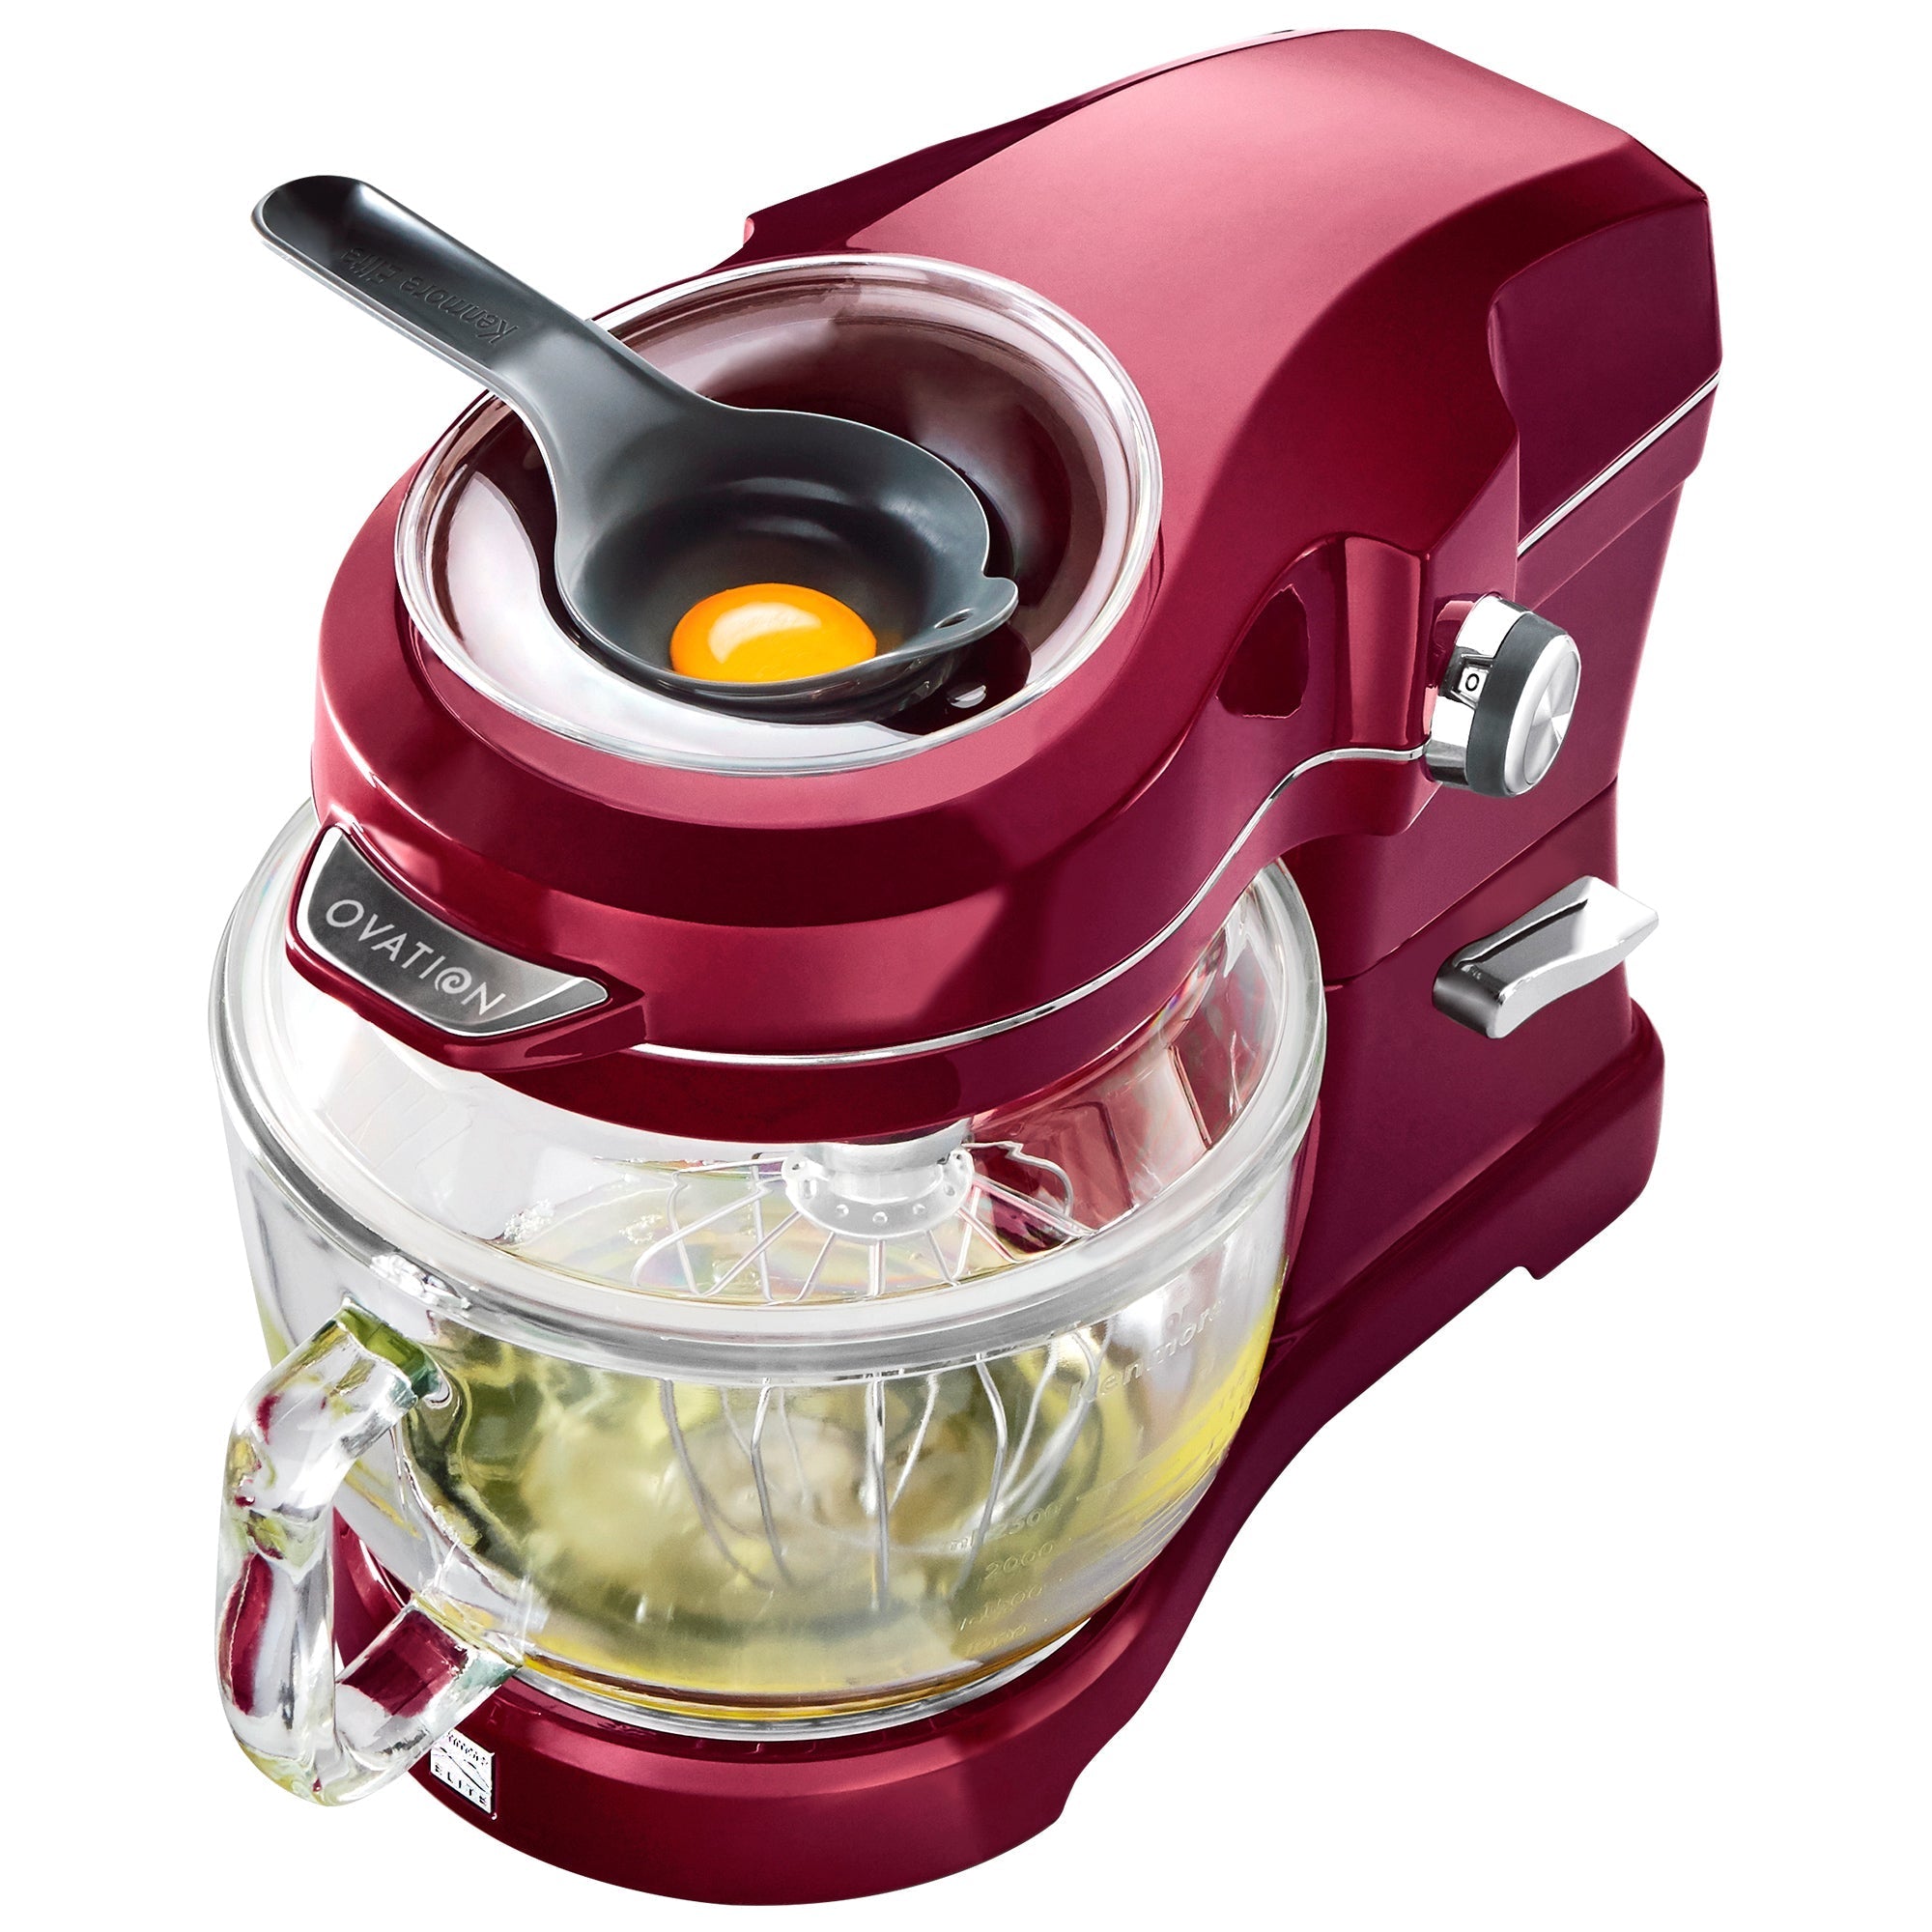 Kenmore Elite Ovation tilt-head stand mixer on white background of mixer with egg separator containing egg in the pour-in top opening